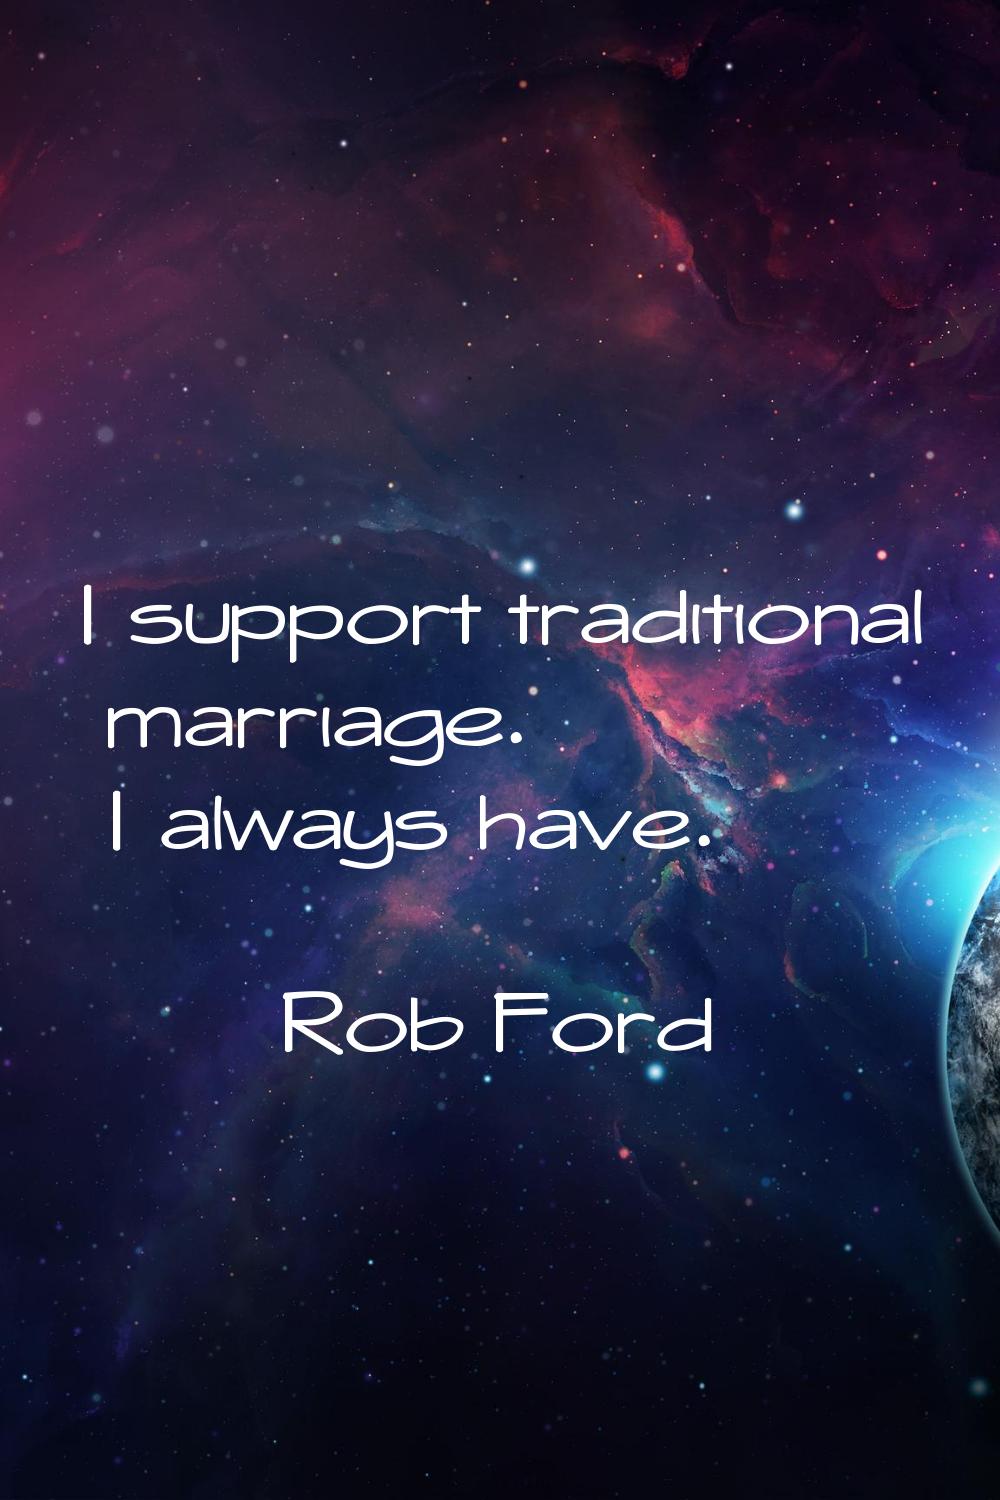 I support traditional marriage. I always have.